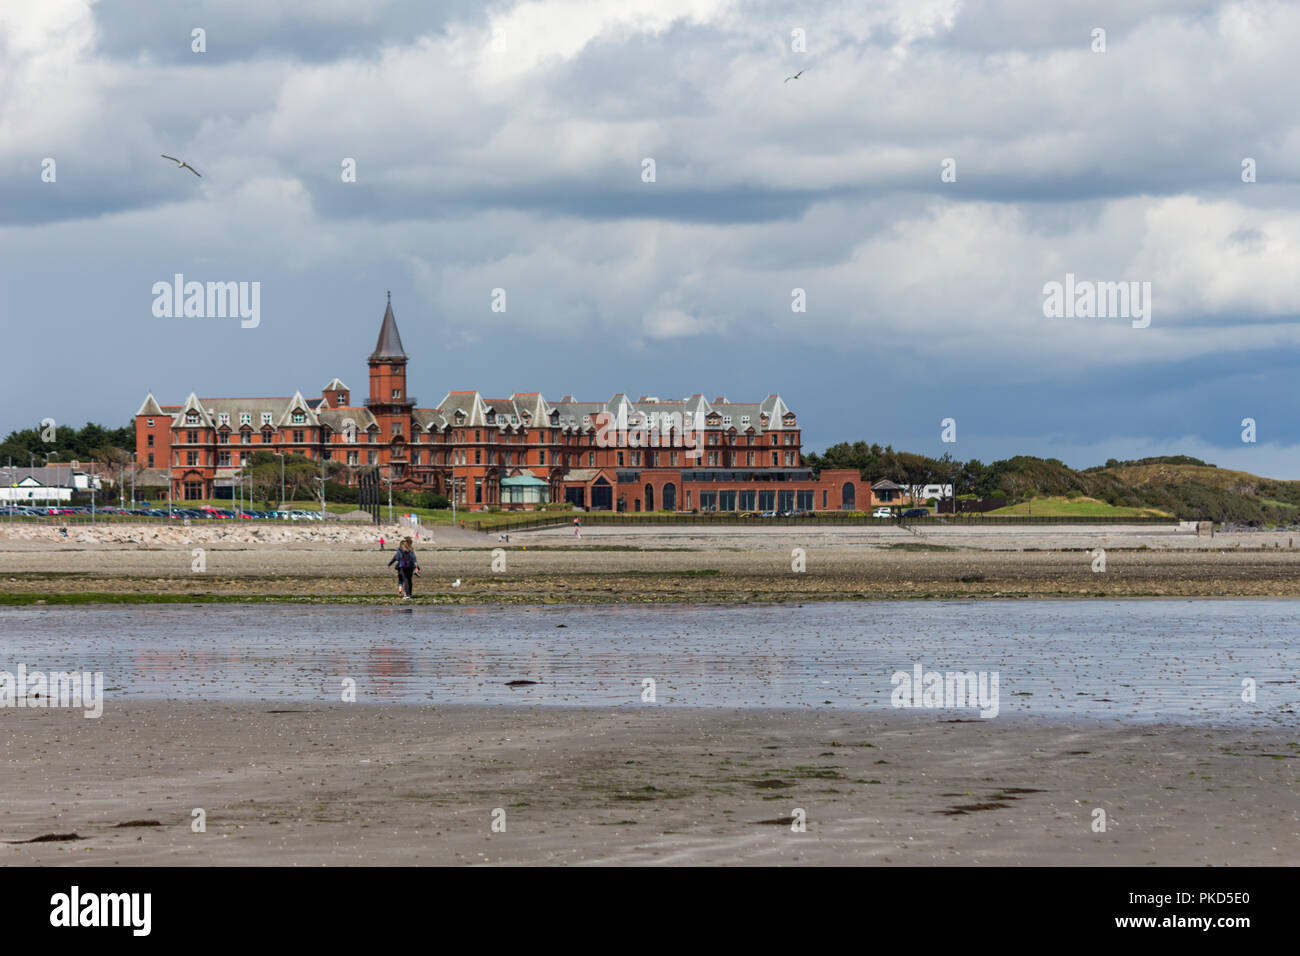 Newcastle beach at low tide with view to the Slieve Donard Hotel. Stock Photo